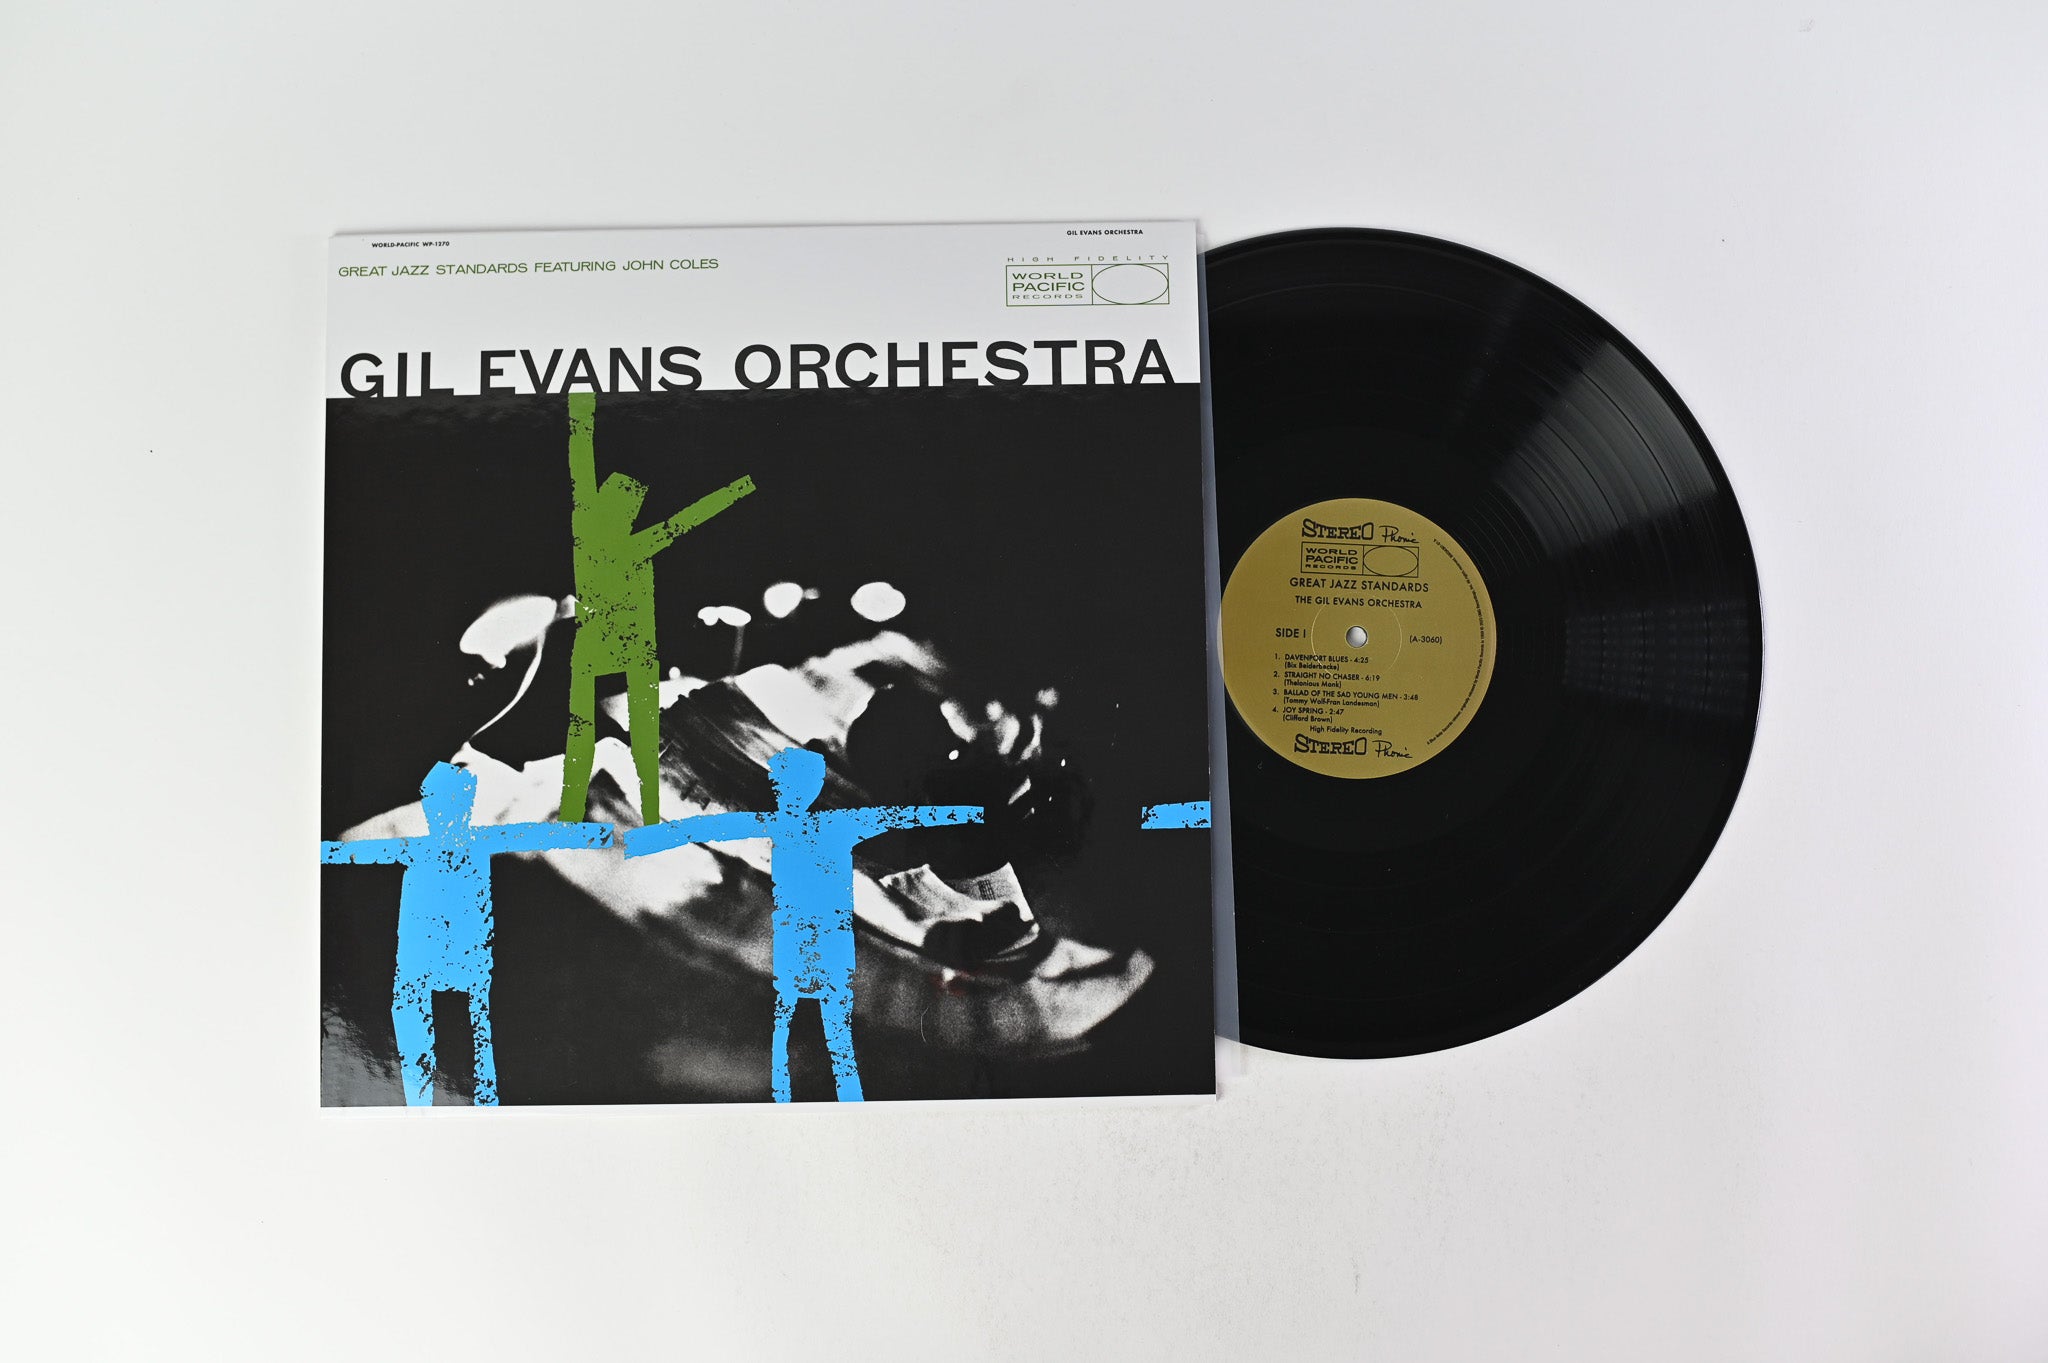 Gil Evans And His Orchestra - Great Jazz Standards on Blue Note Tone Poet Series